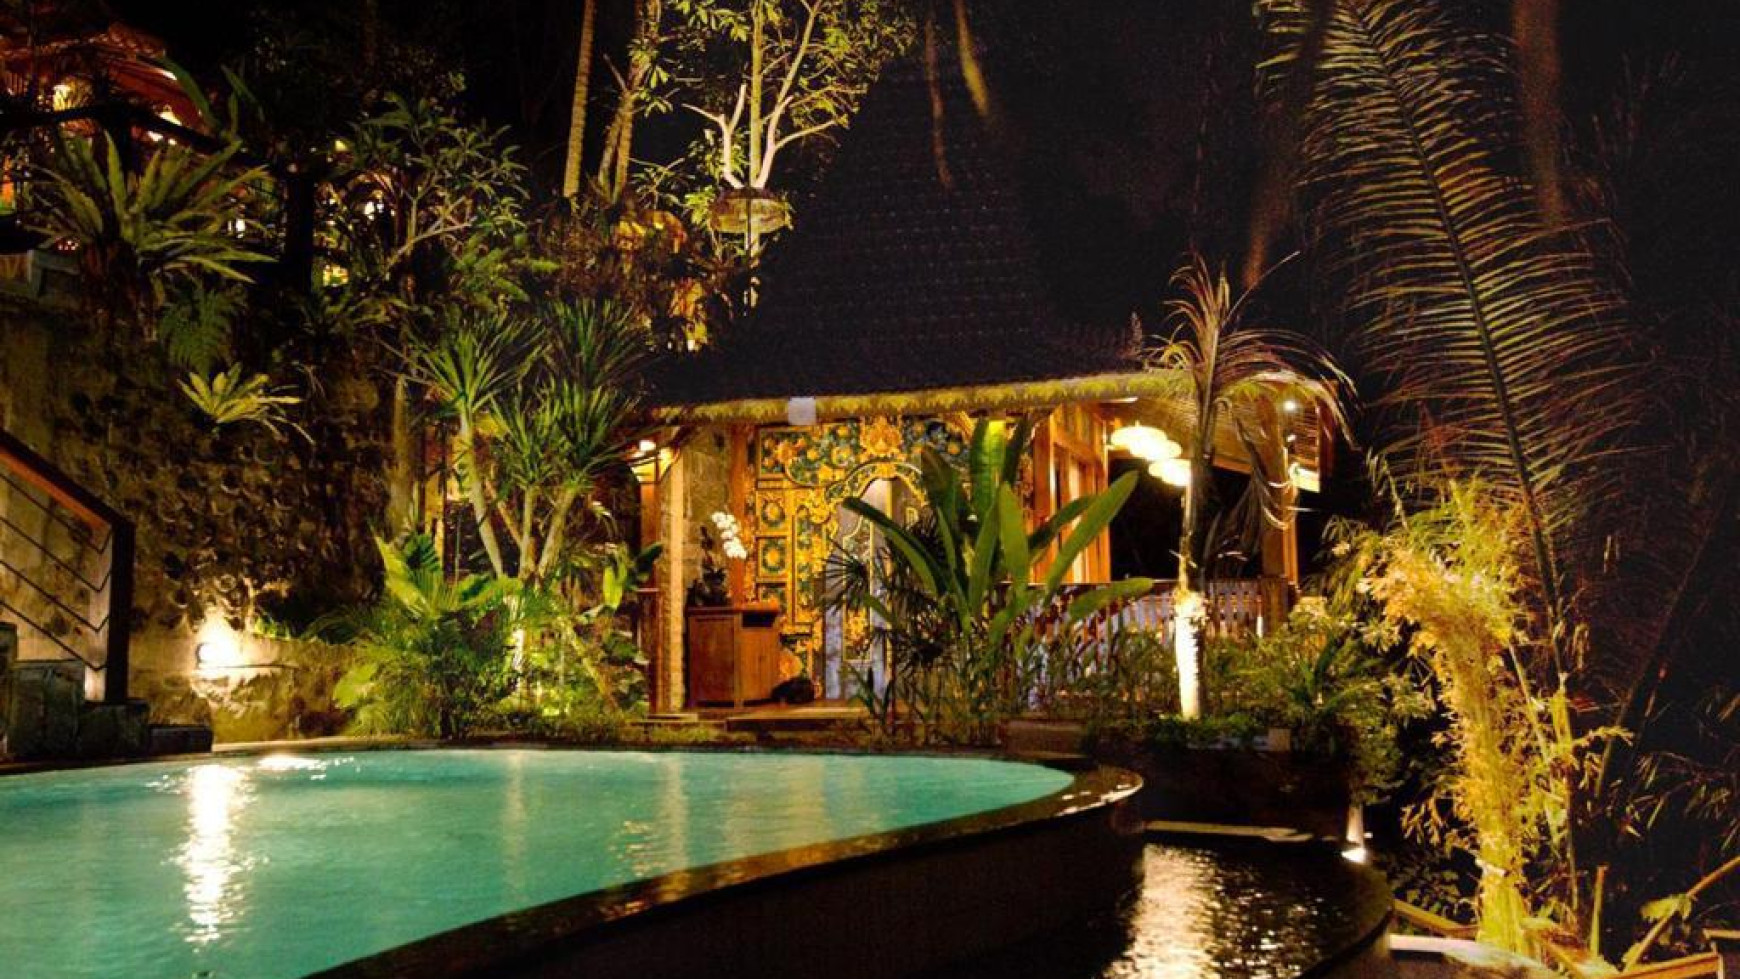 For Sale 5 Bedroom Brand New Joglo Villa with Beautiful Jungle View just 5 Minutes From Ubud Center